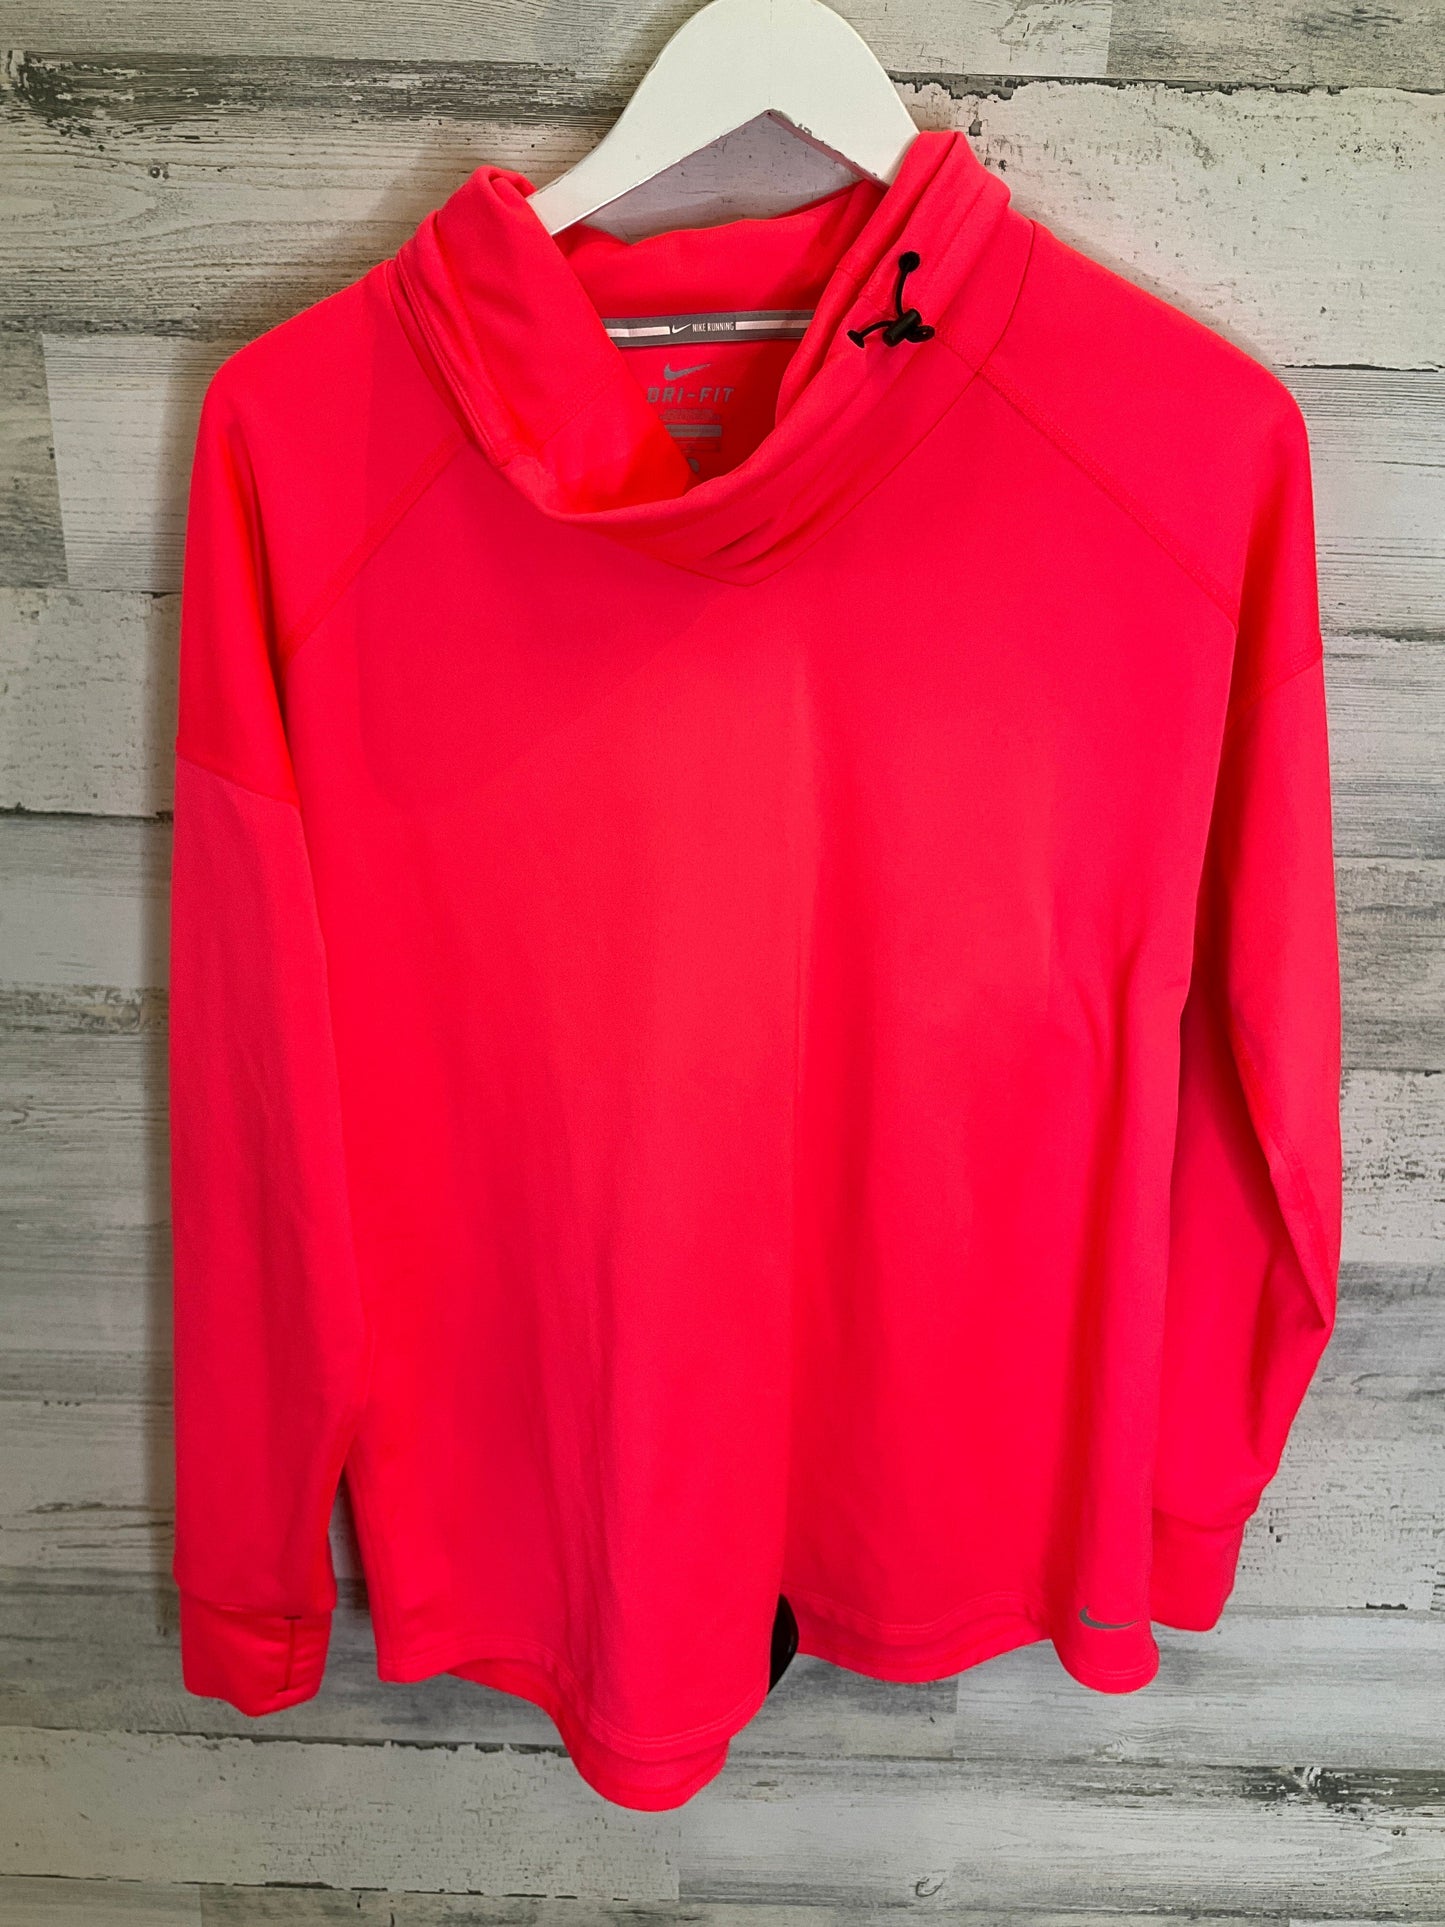 Coral Athletic Top Long Sleeve Collar Nike, Size L